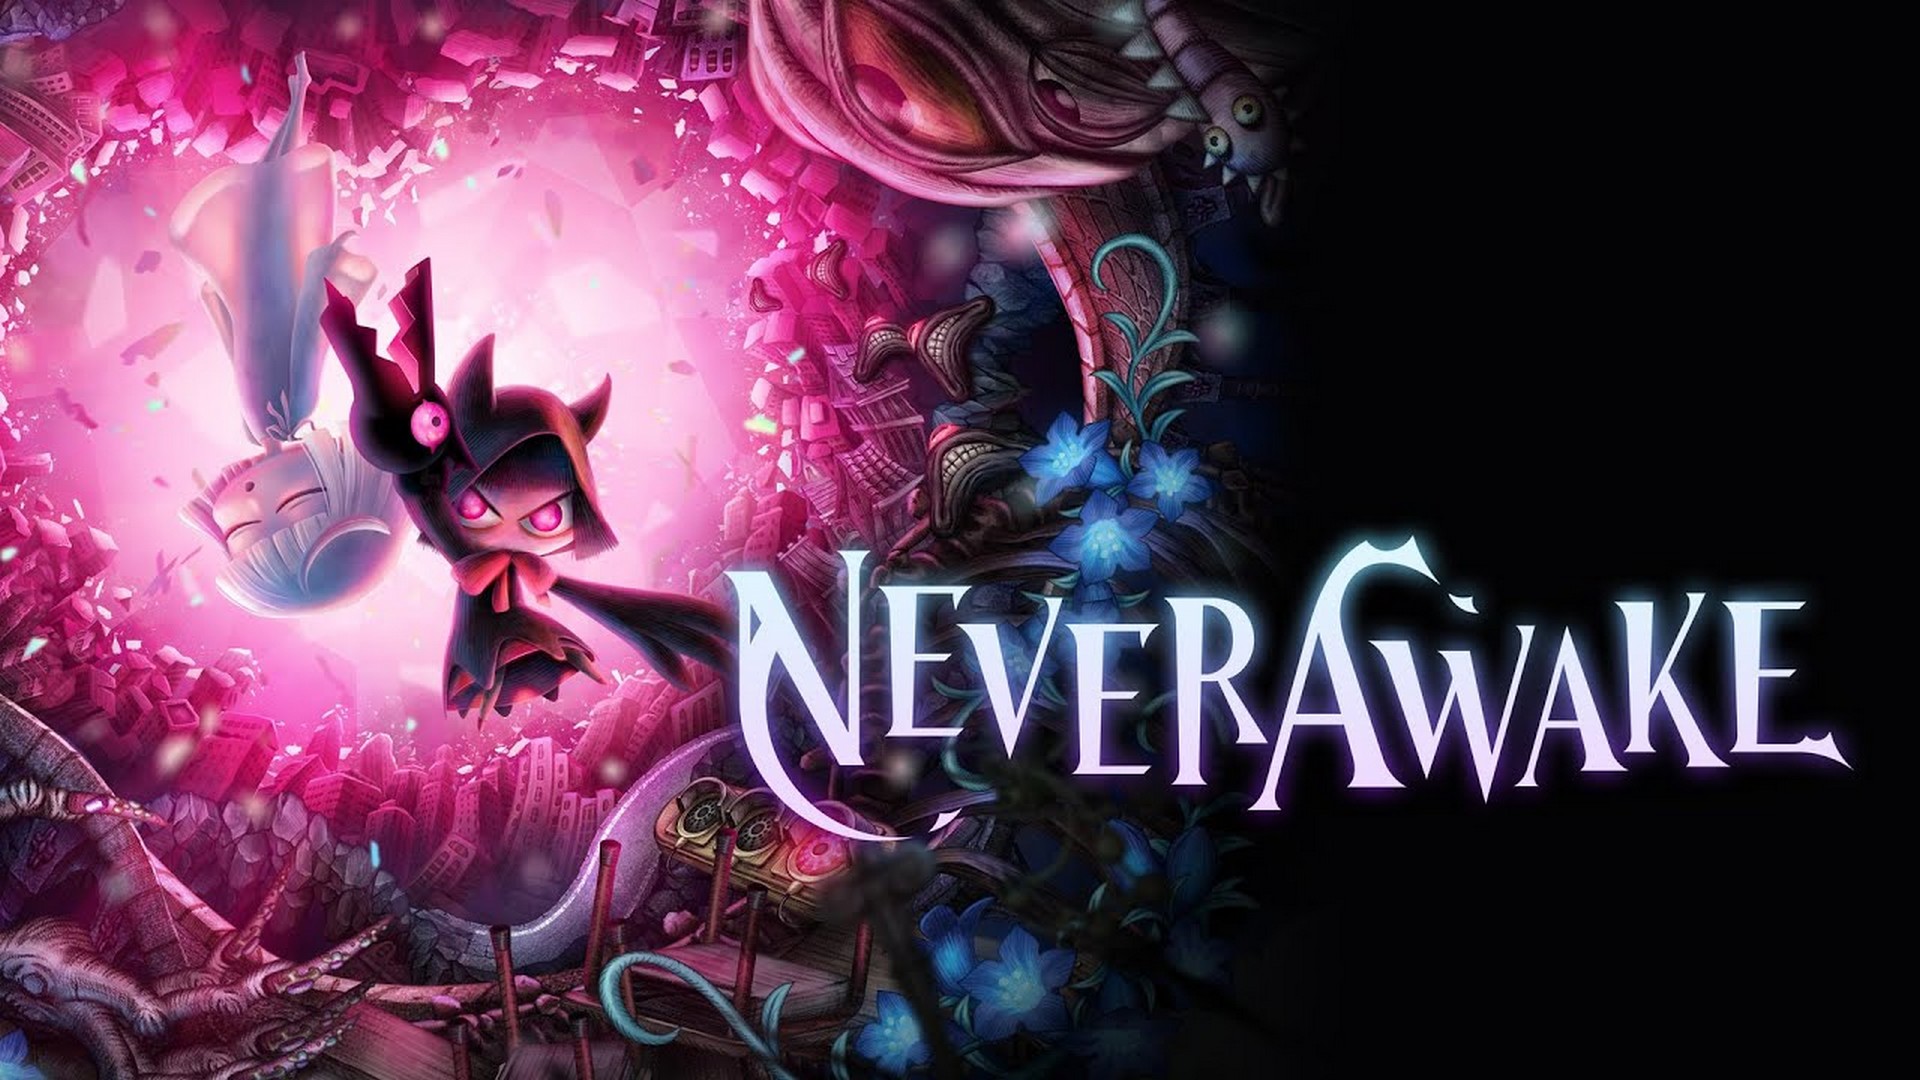 “NeverAwake” Critically Acclaimed Twin-Stick Nightmare Shoot’em Up OUT NOW On Xbox Consoles